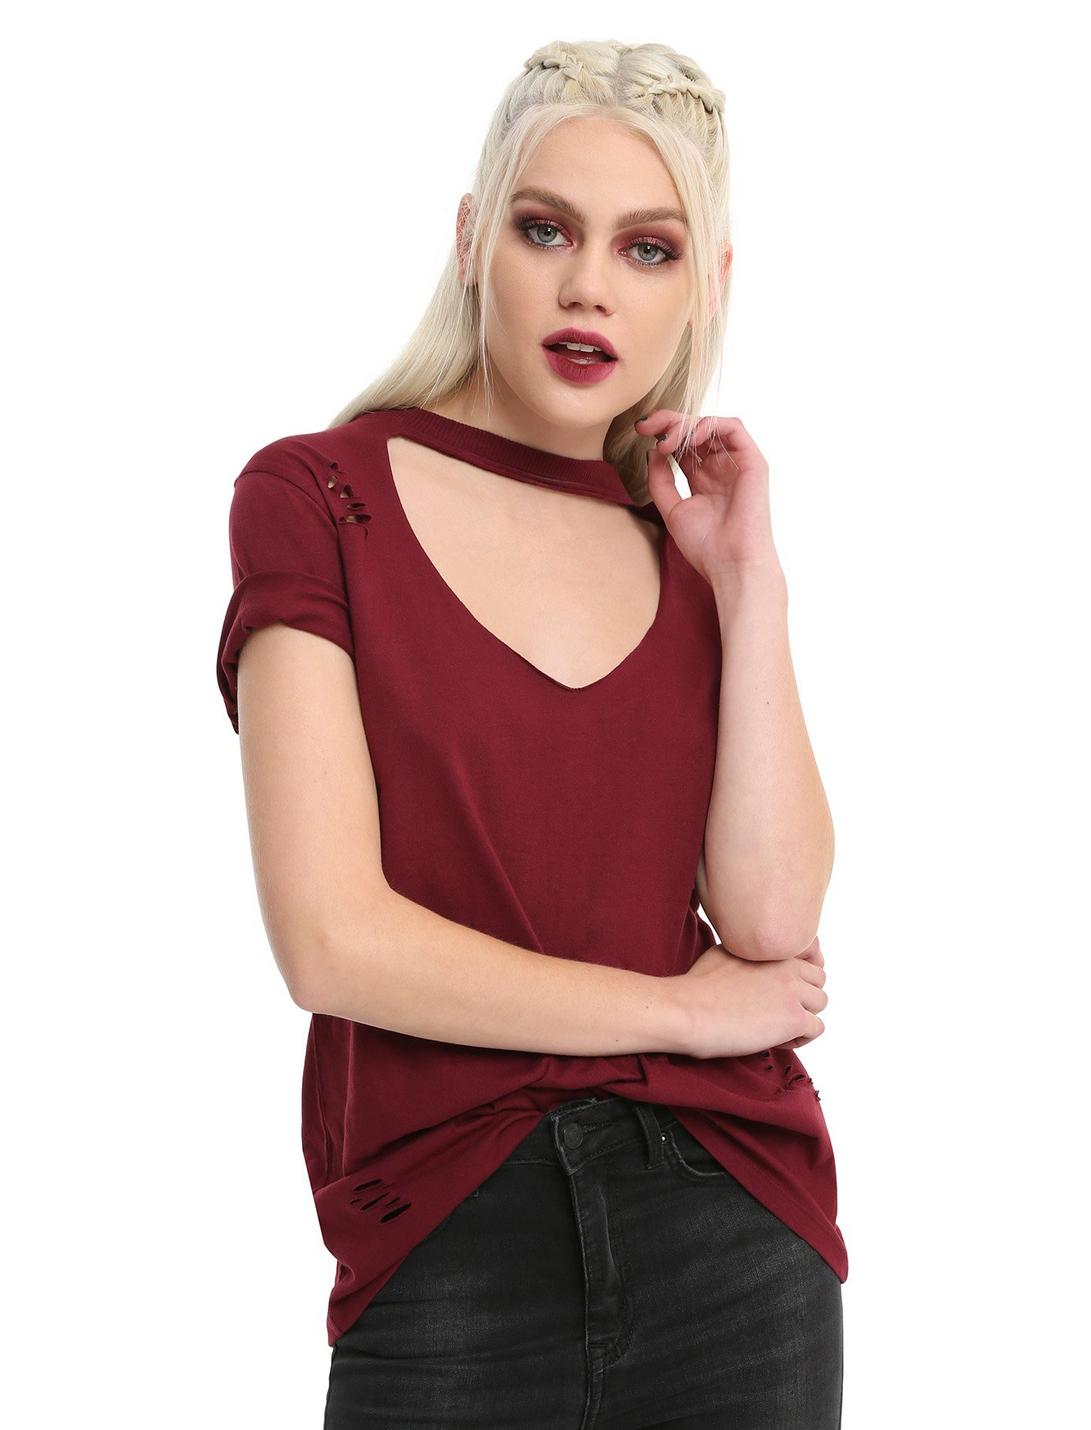 Red V Cutout Choker Destroyed Girls T-Shirt, RED, hi-res